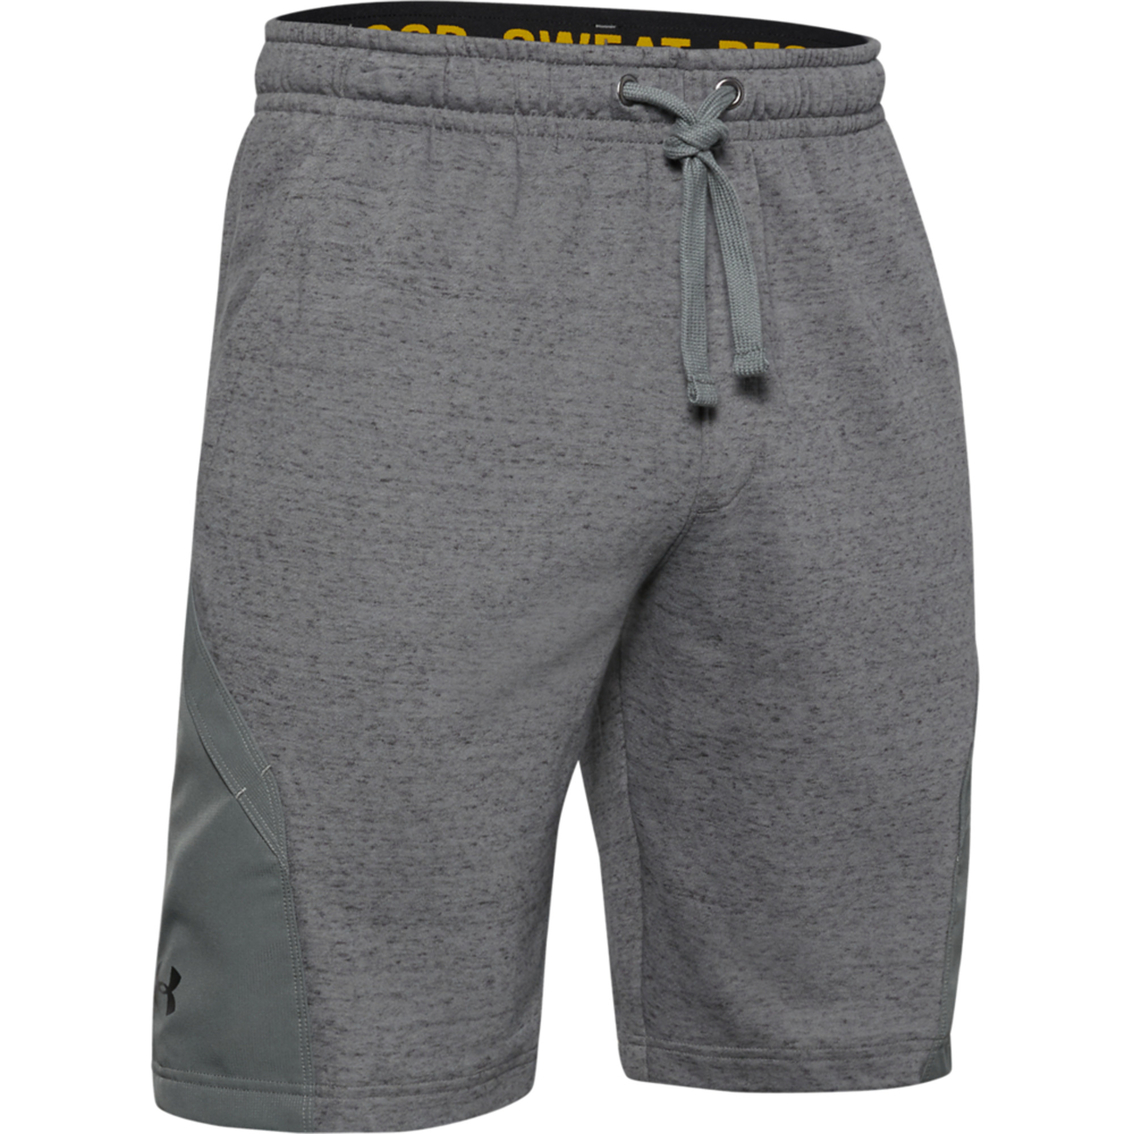 Under Armour Project Rock Terry Shorts | Shorts | Clothing ...